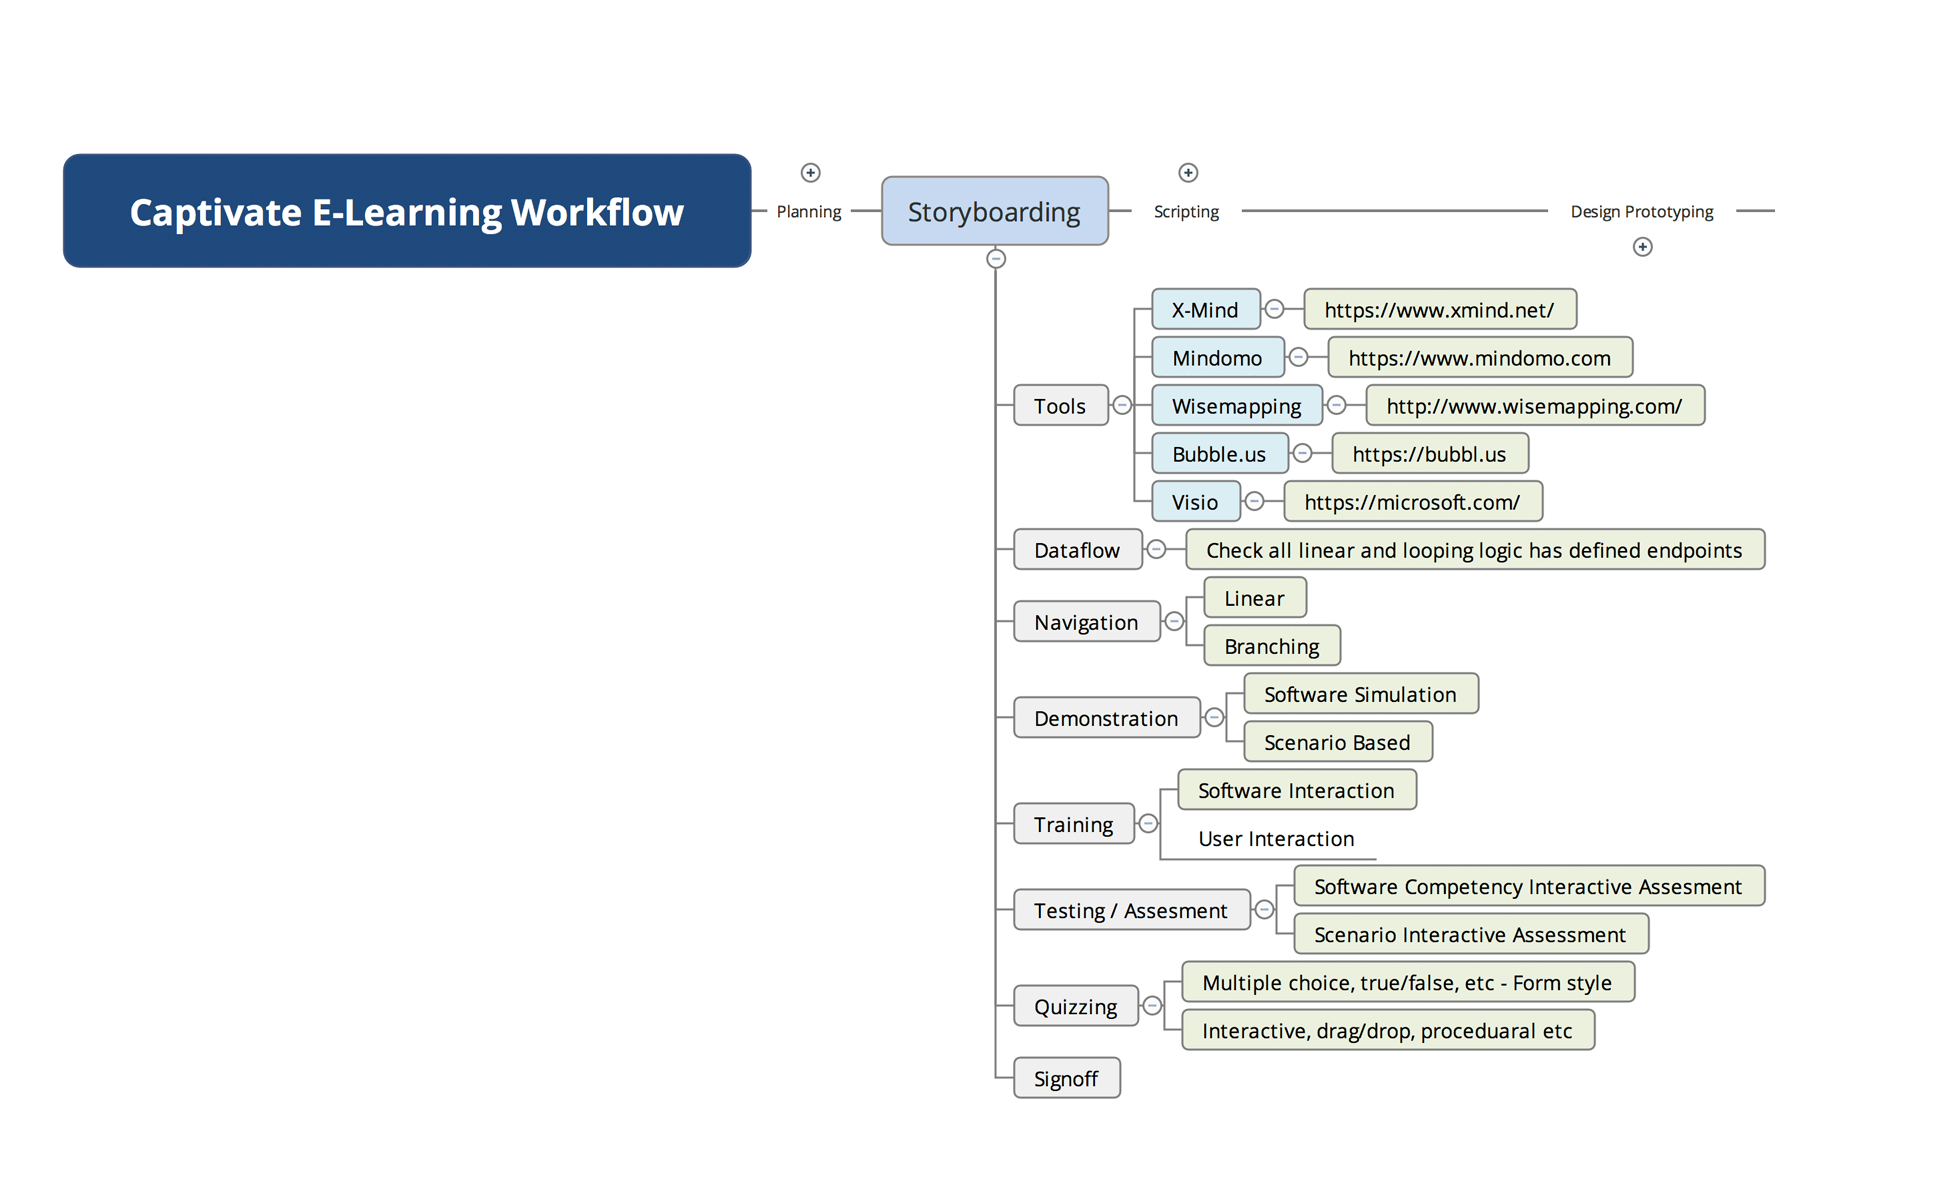 Captivate E-Learning Workflow